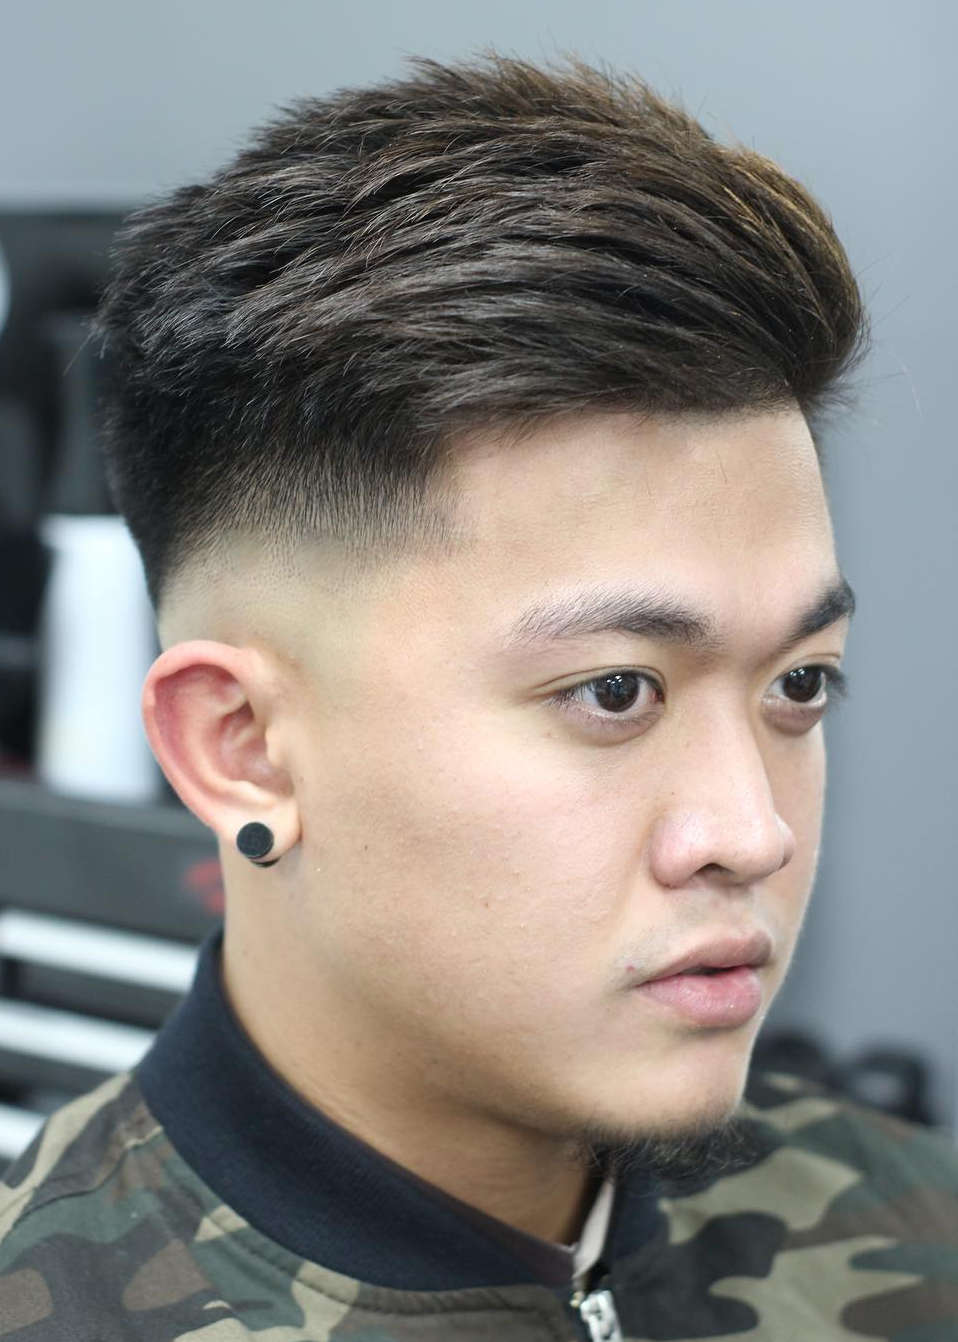 25 asian men hairstyles- style up with the avid variety of